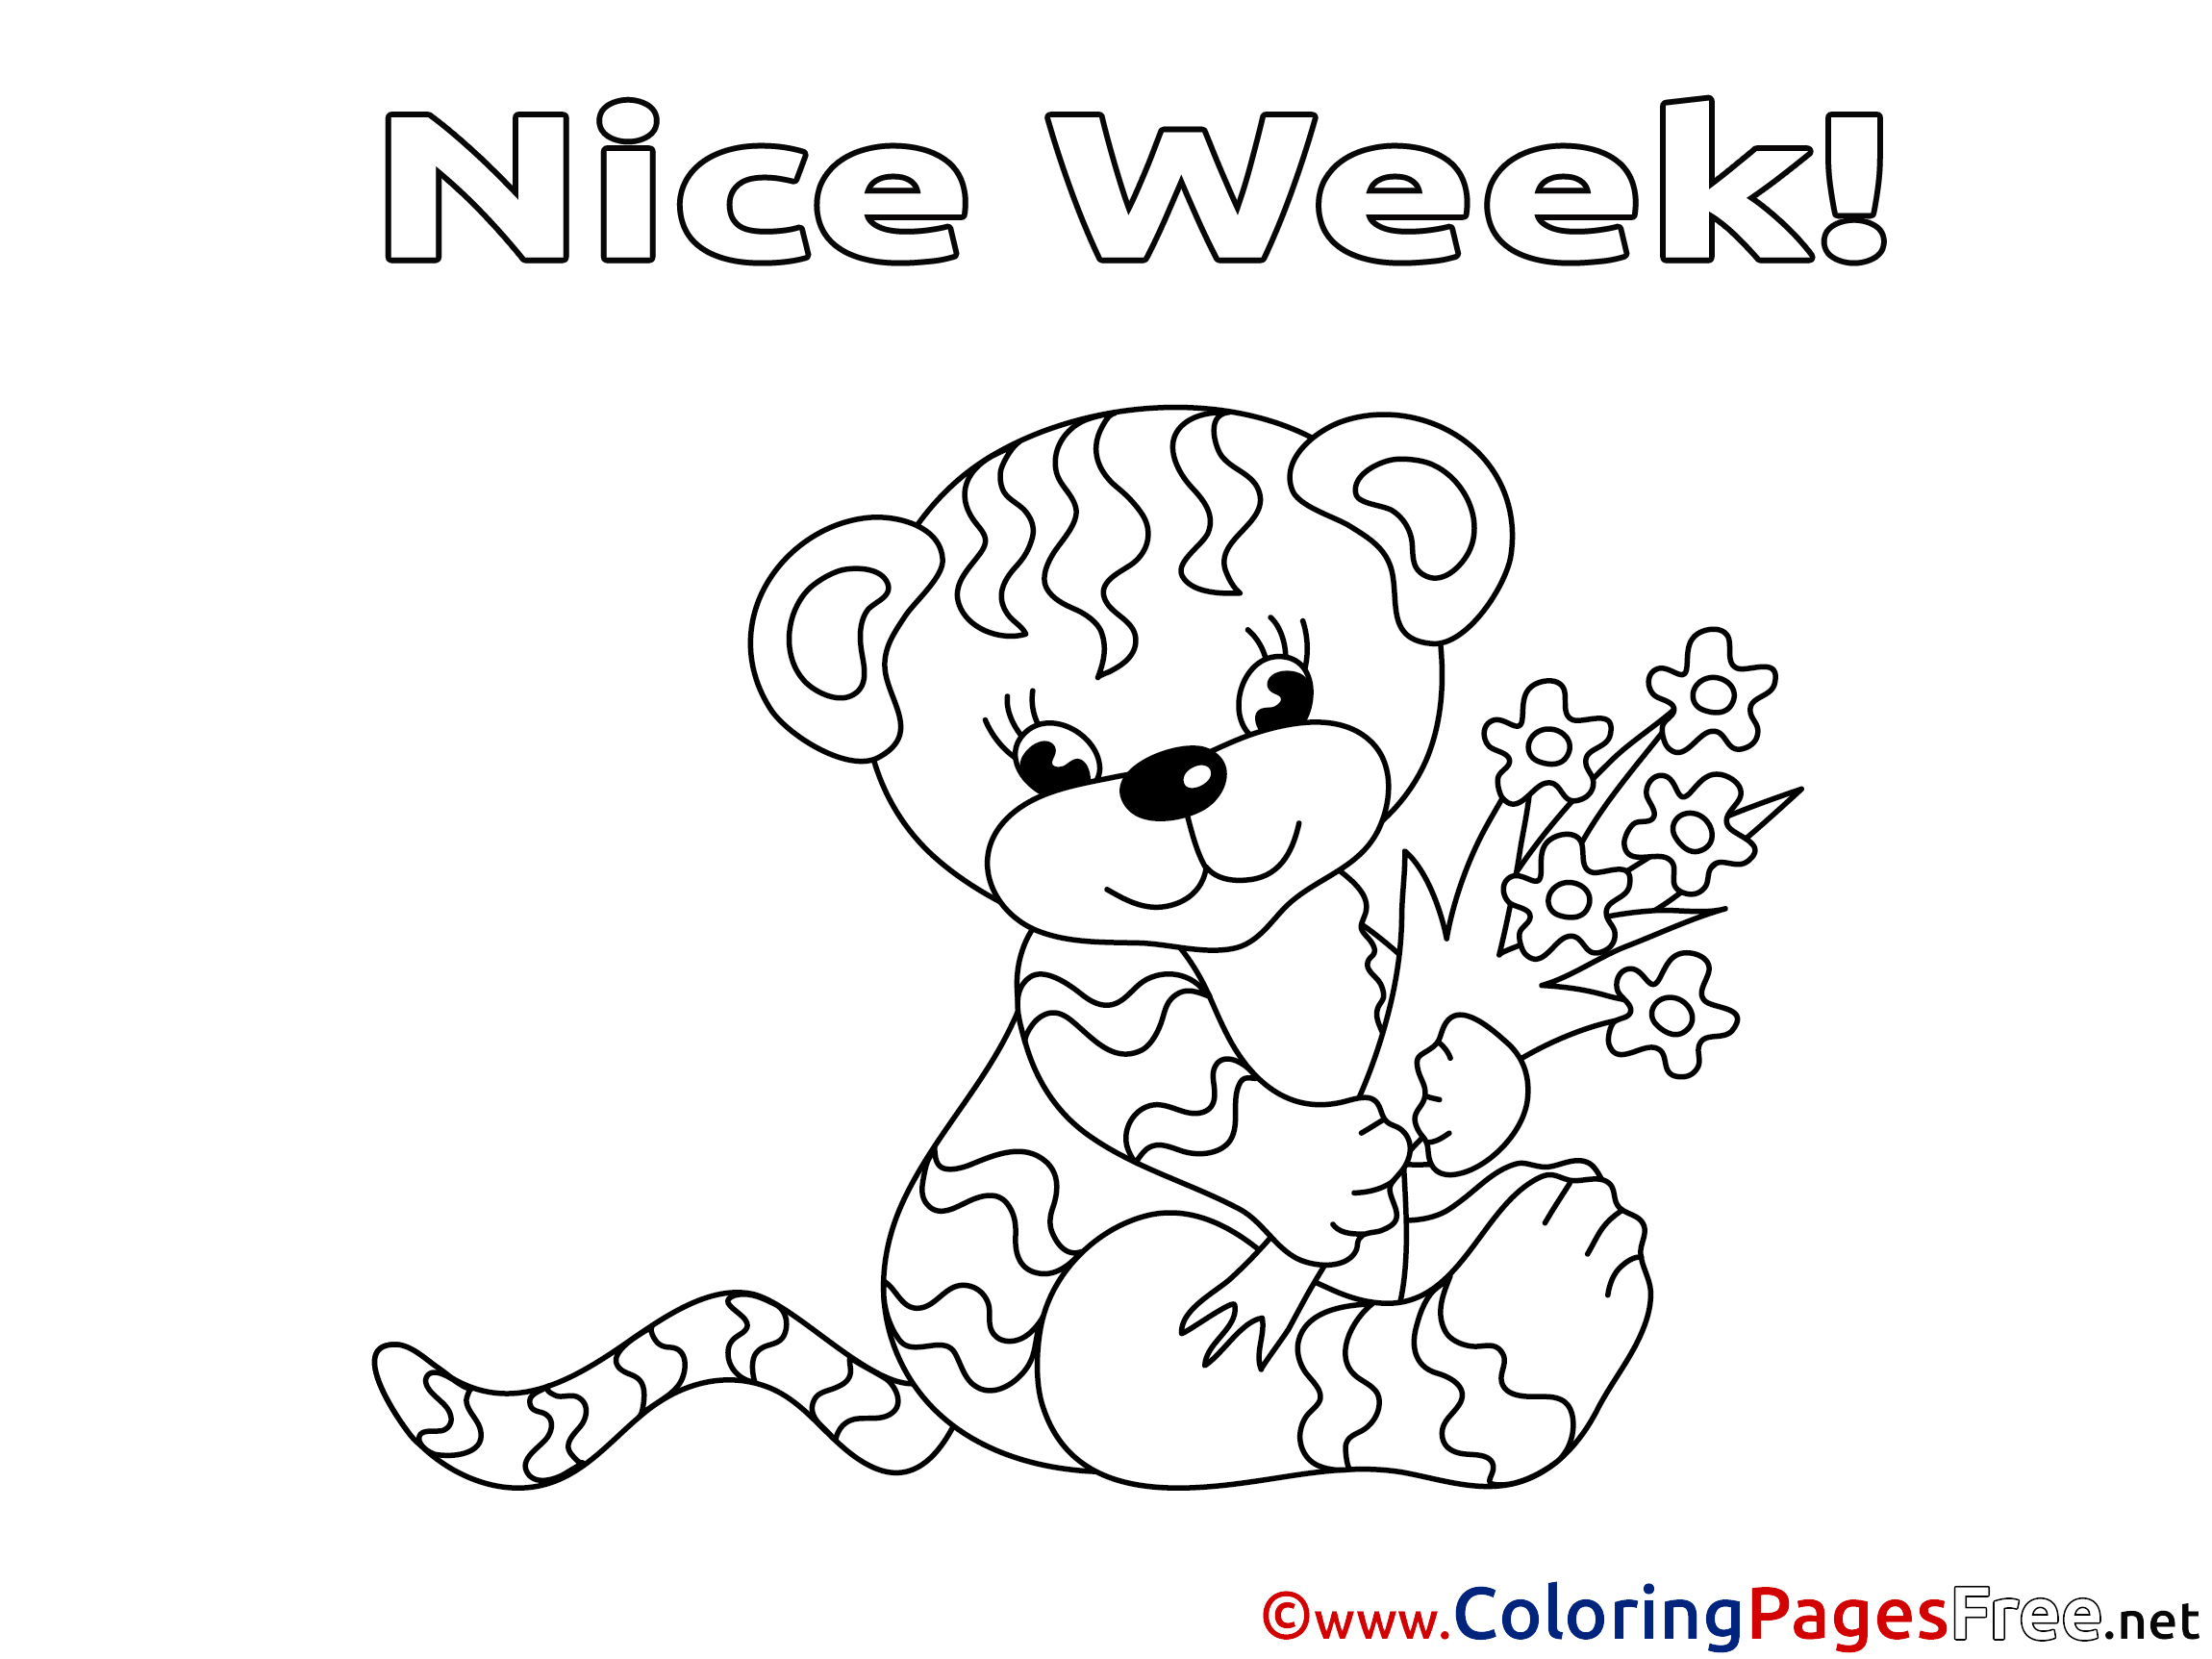 Tiger Colouring Page Nice Week free